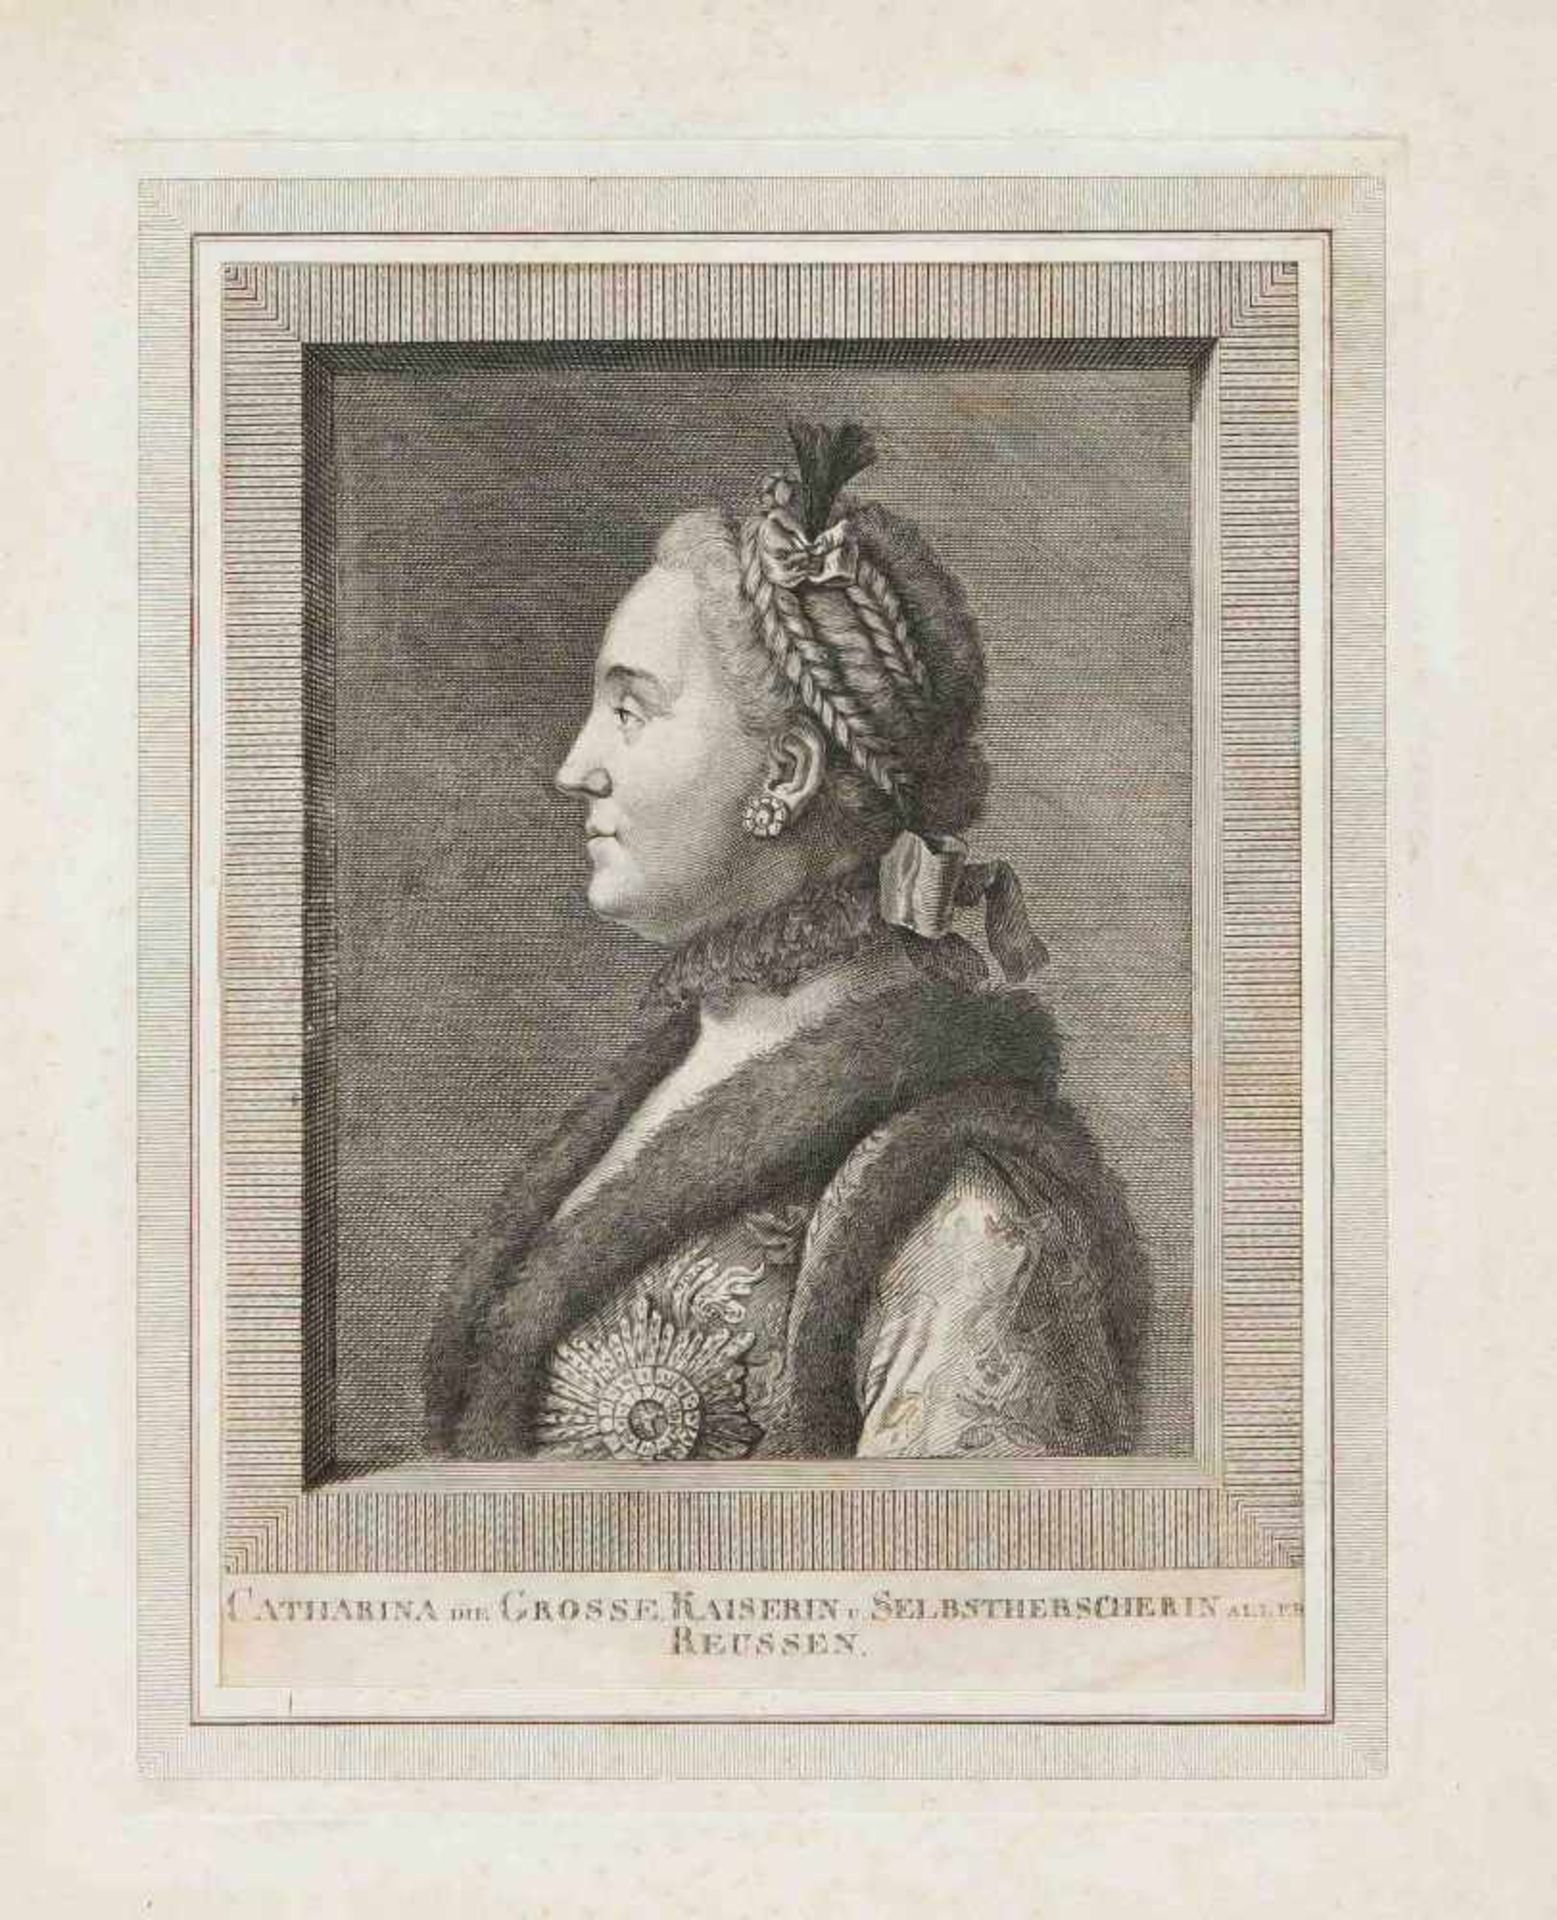 Two graphics with Russian motifs, 19th century, profile portrait of Catherine the Great''Empress and